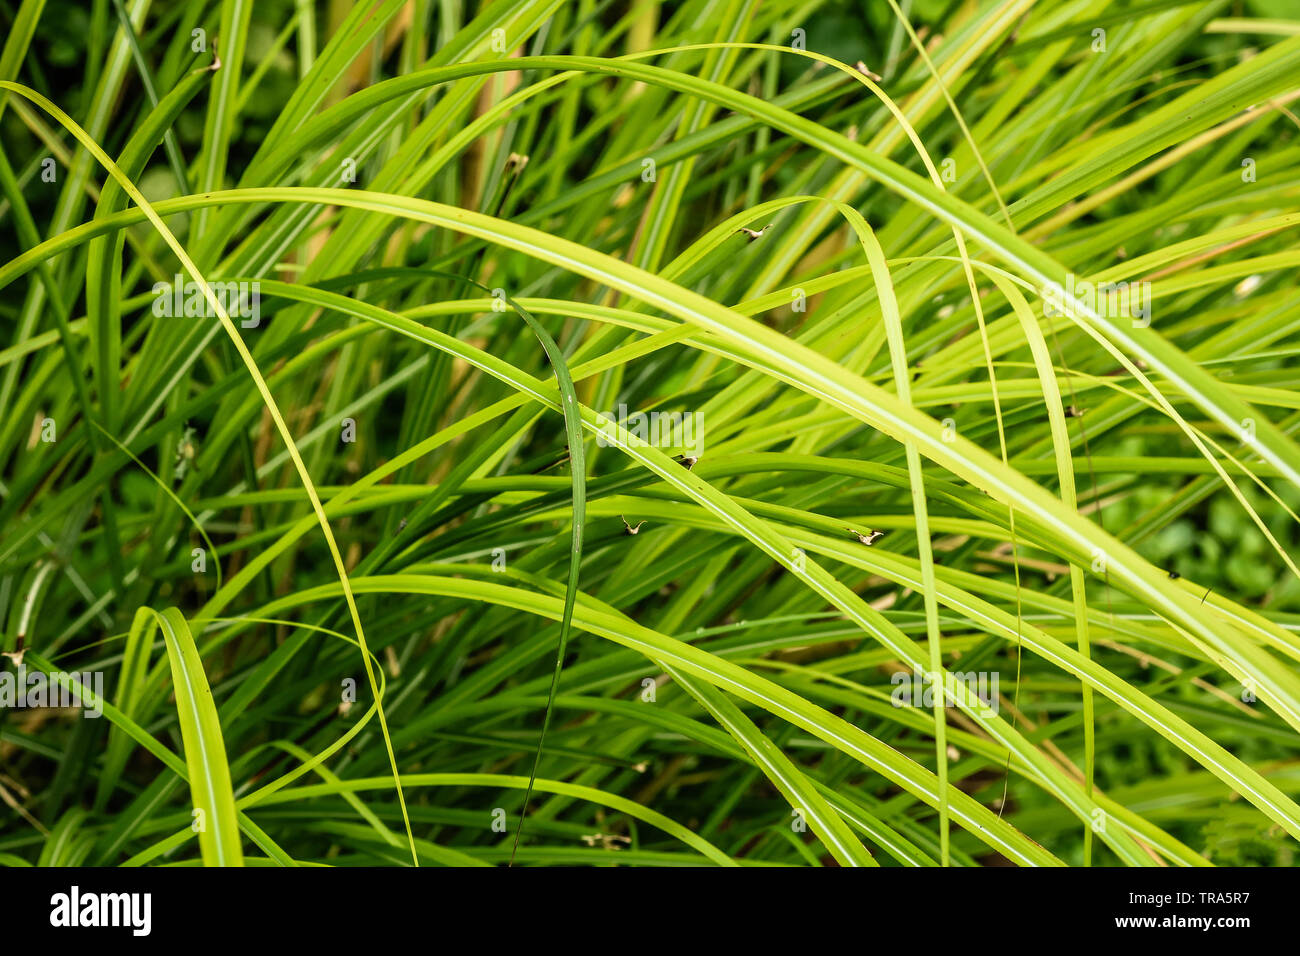 Play of the fresh green grass and its leafs. Stock Photo